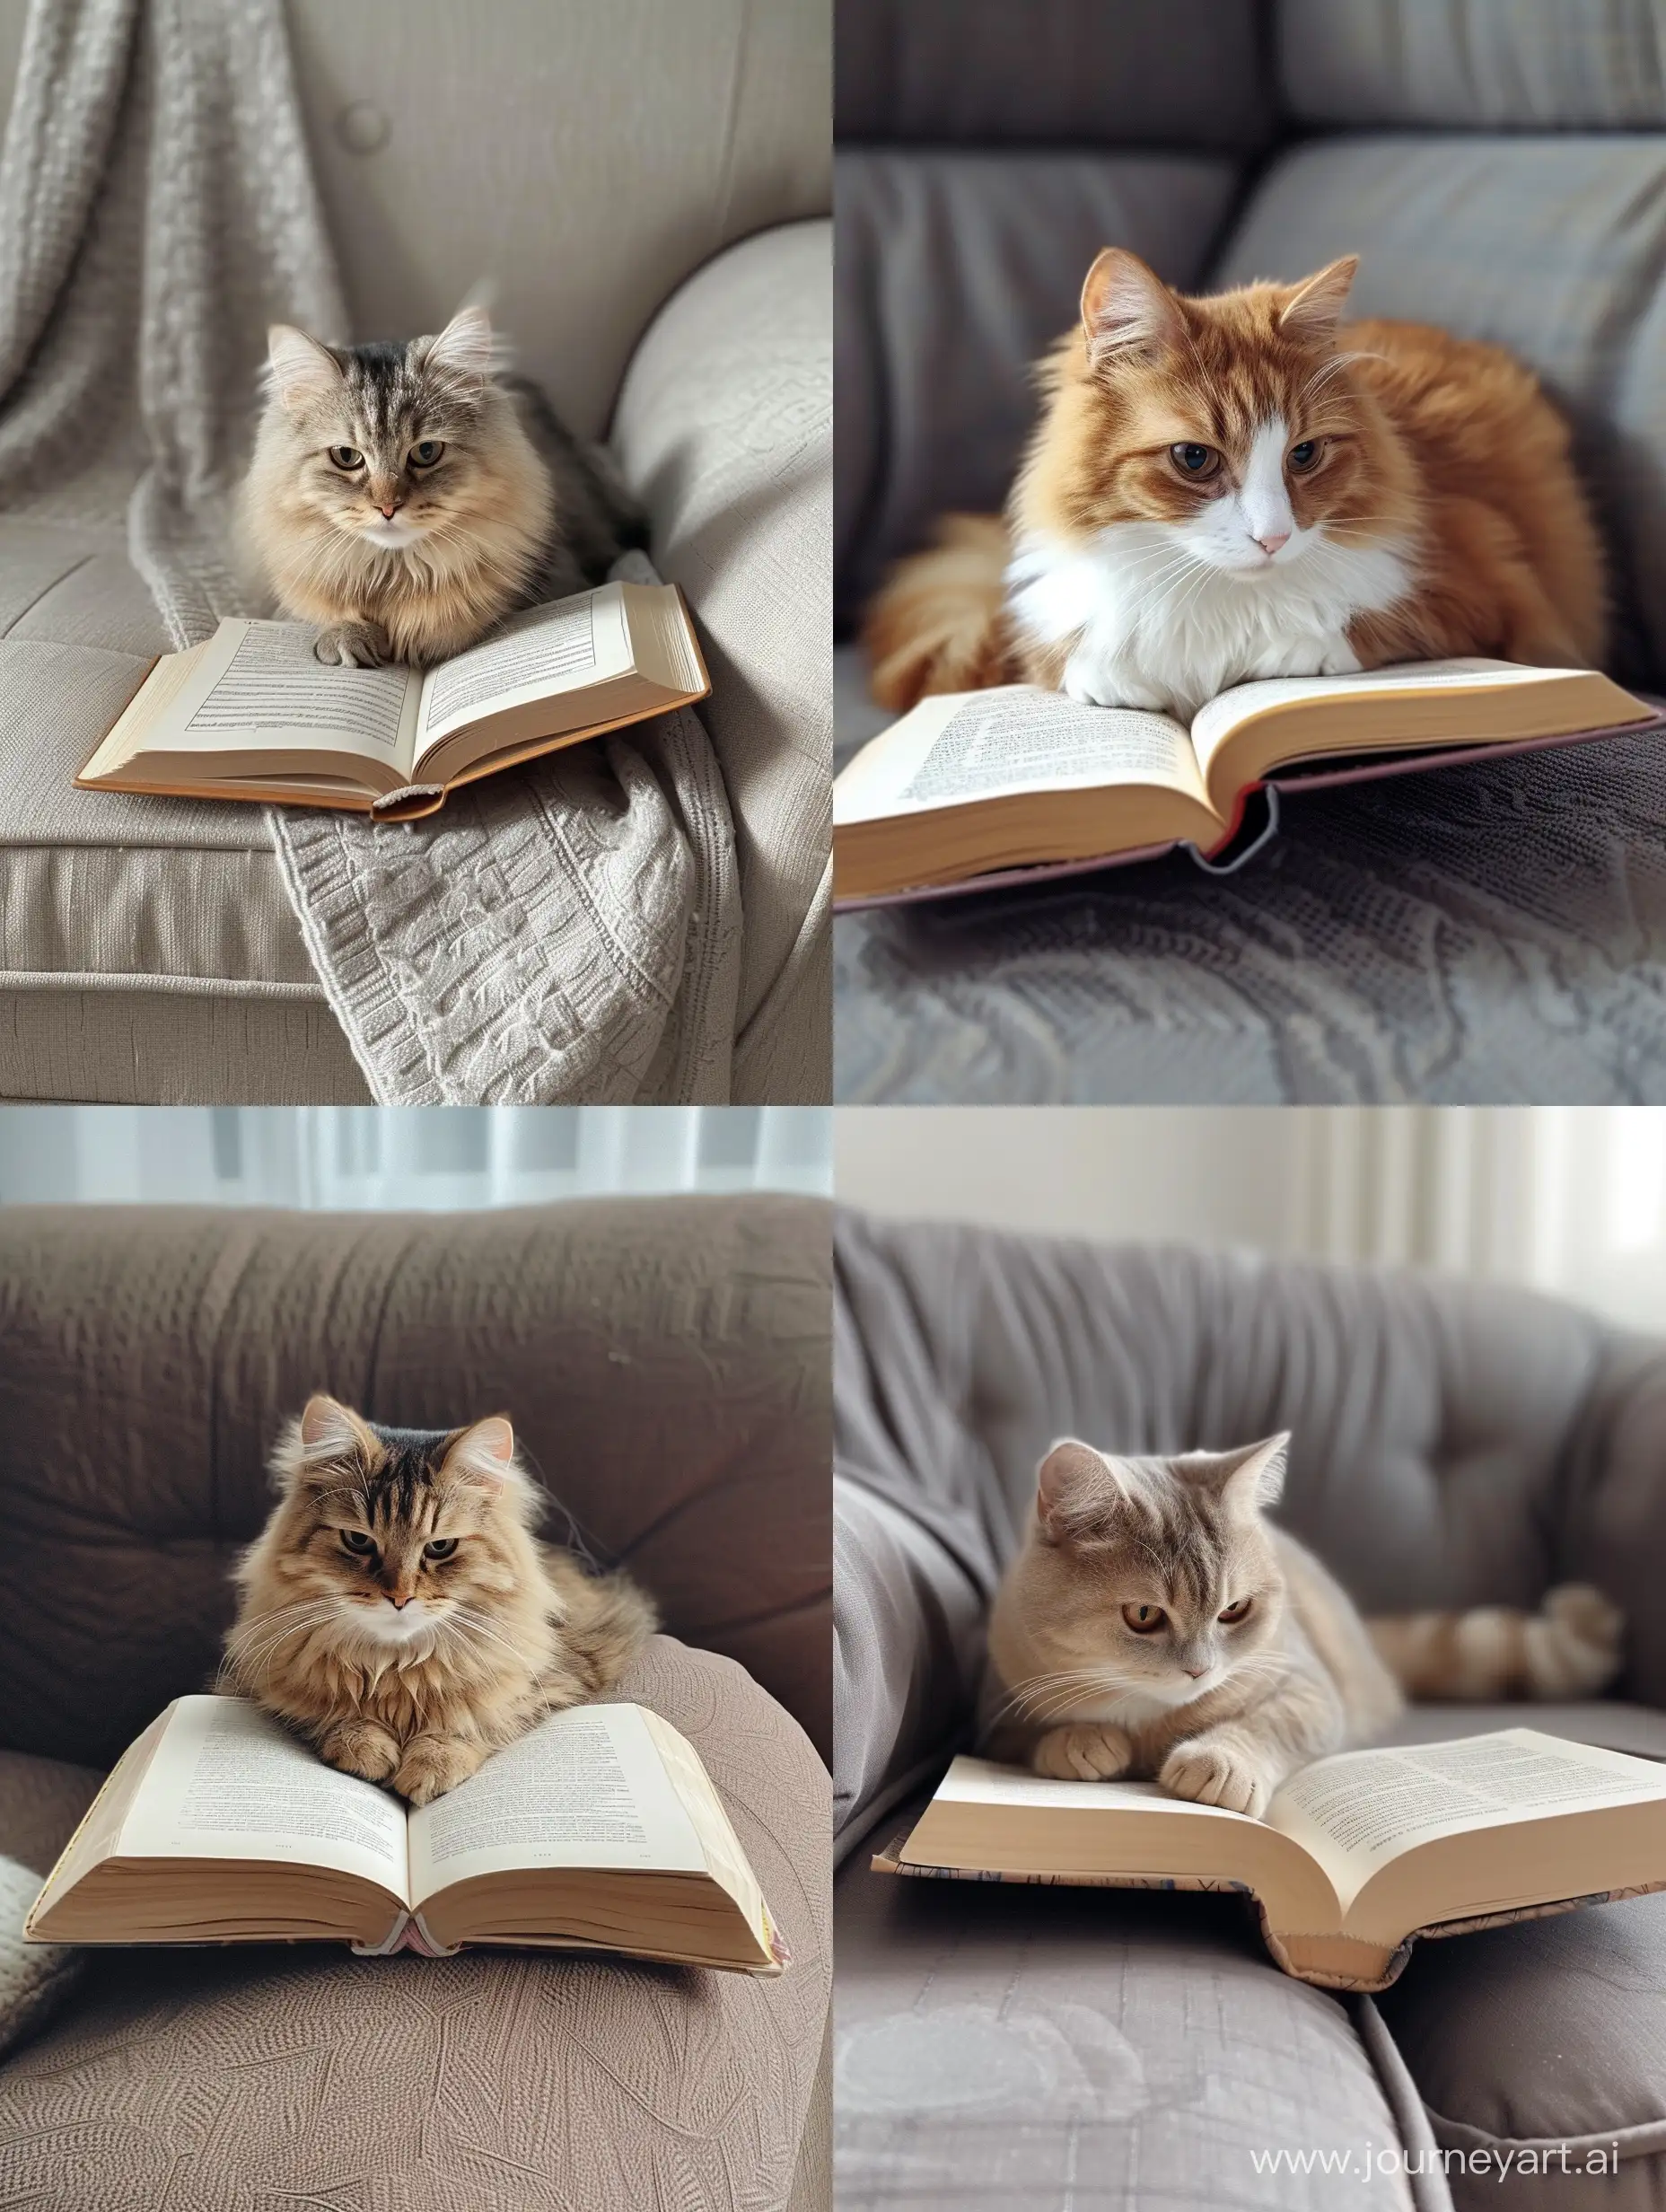 Adorable-Cat-Enjoying-a-Quiet-Moment-with-a-Book-on-the-Comfortable-Sofa